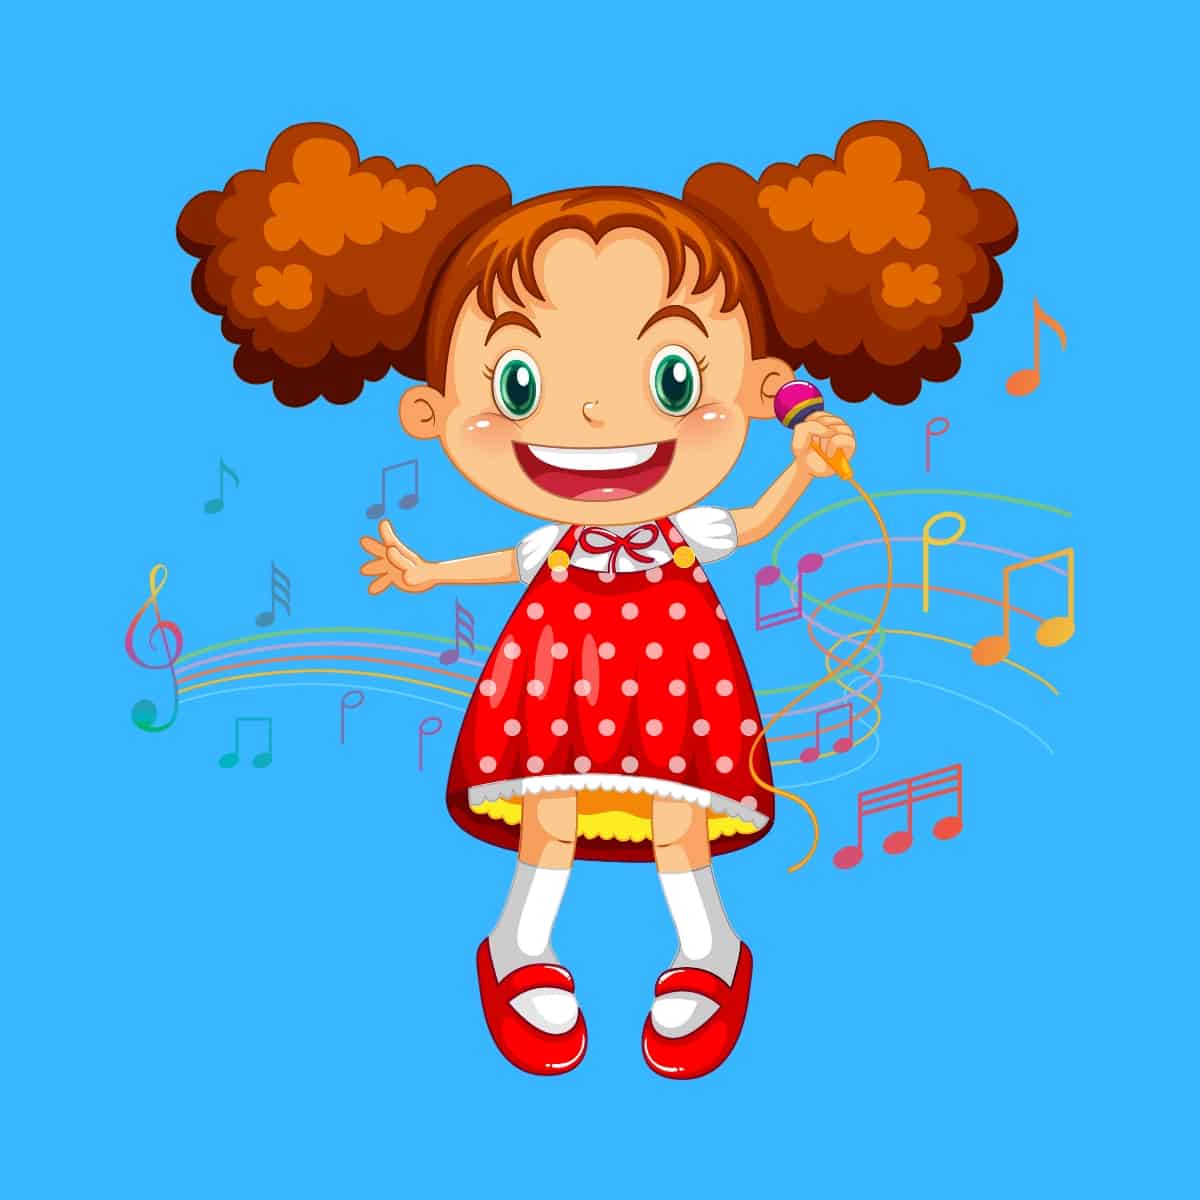 Cartoon graphic of a girl singing into a microphone with musical notes around her on a blue background.